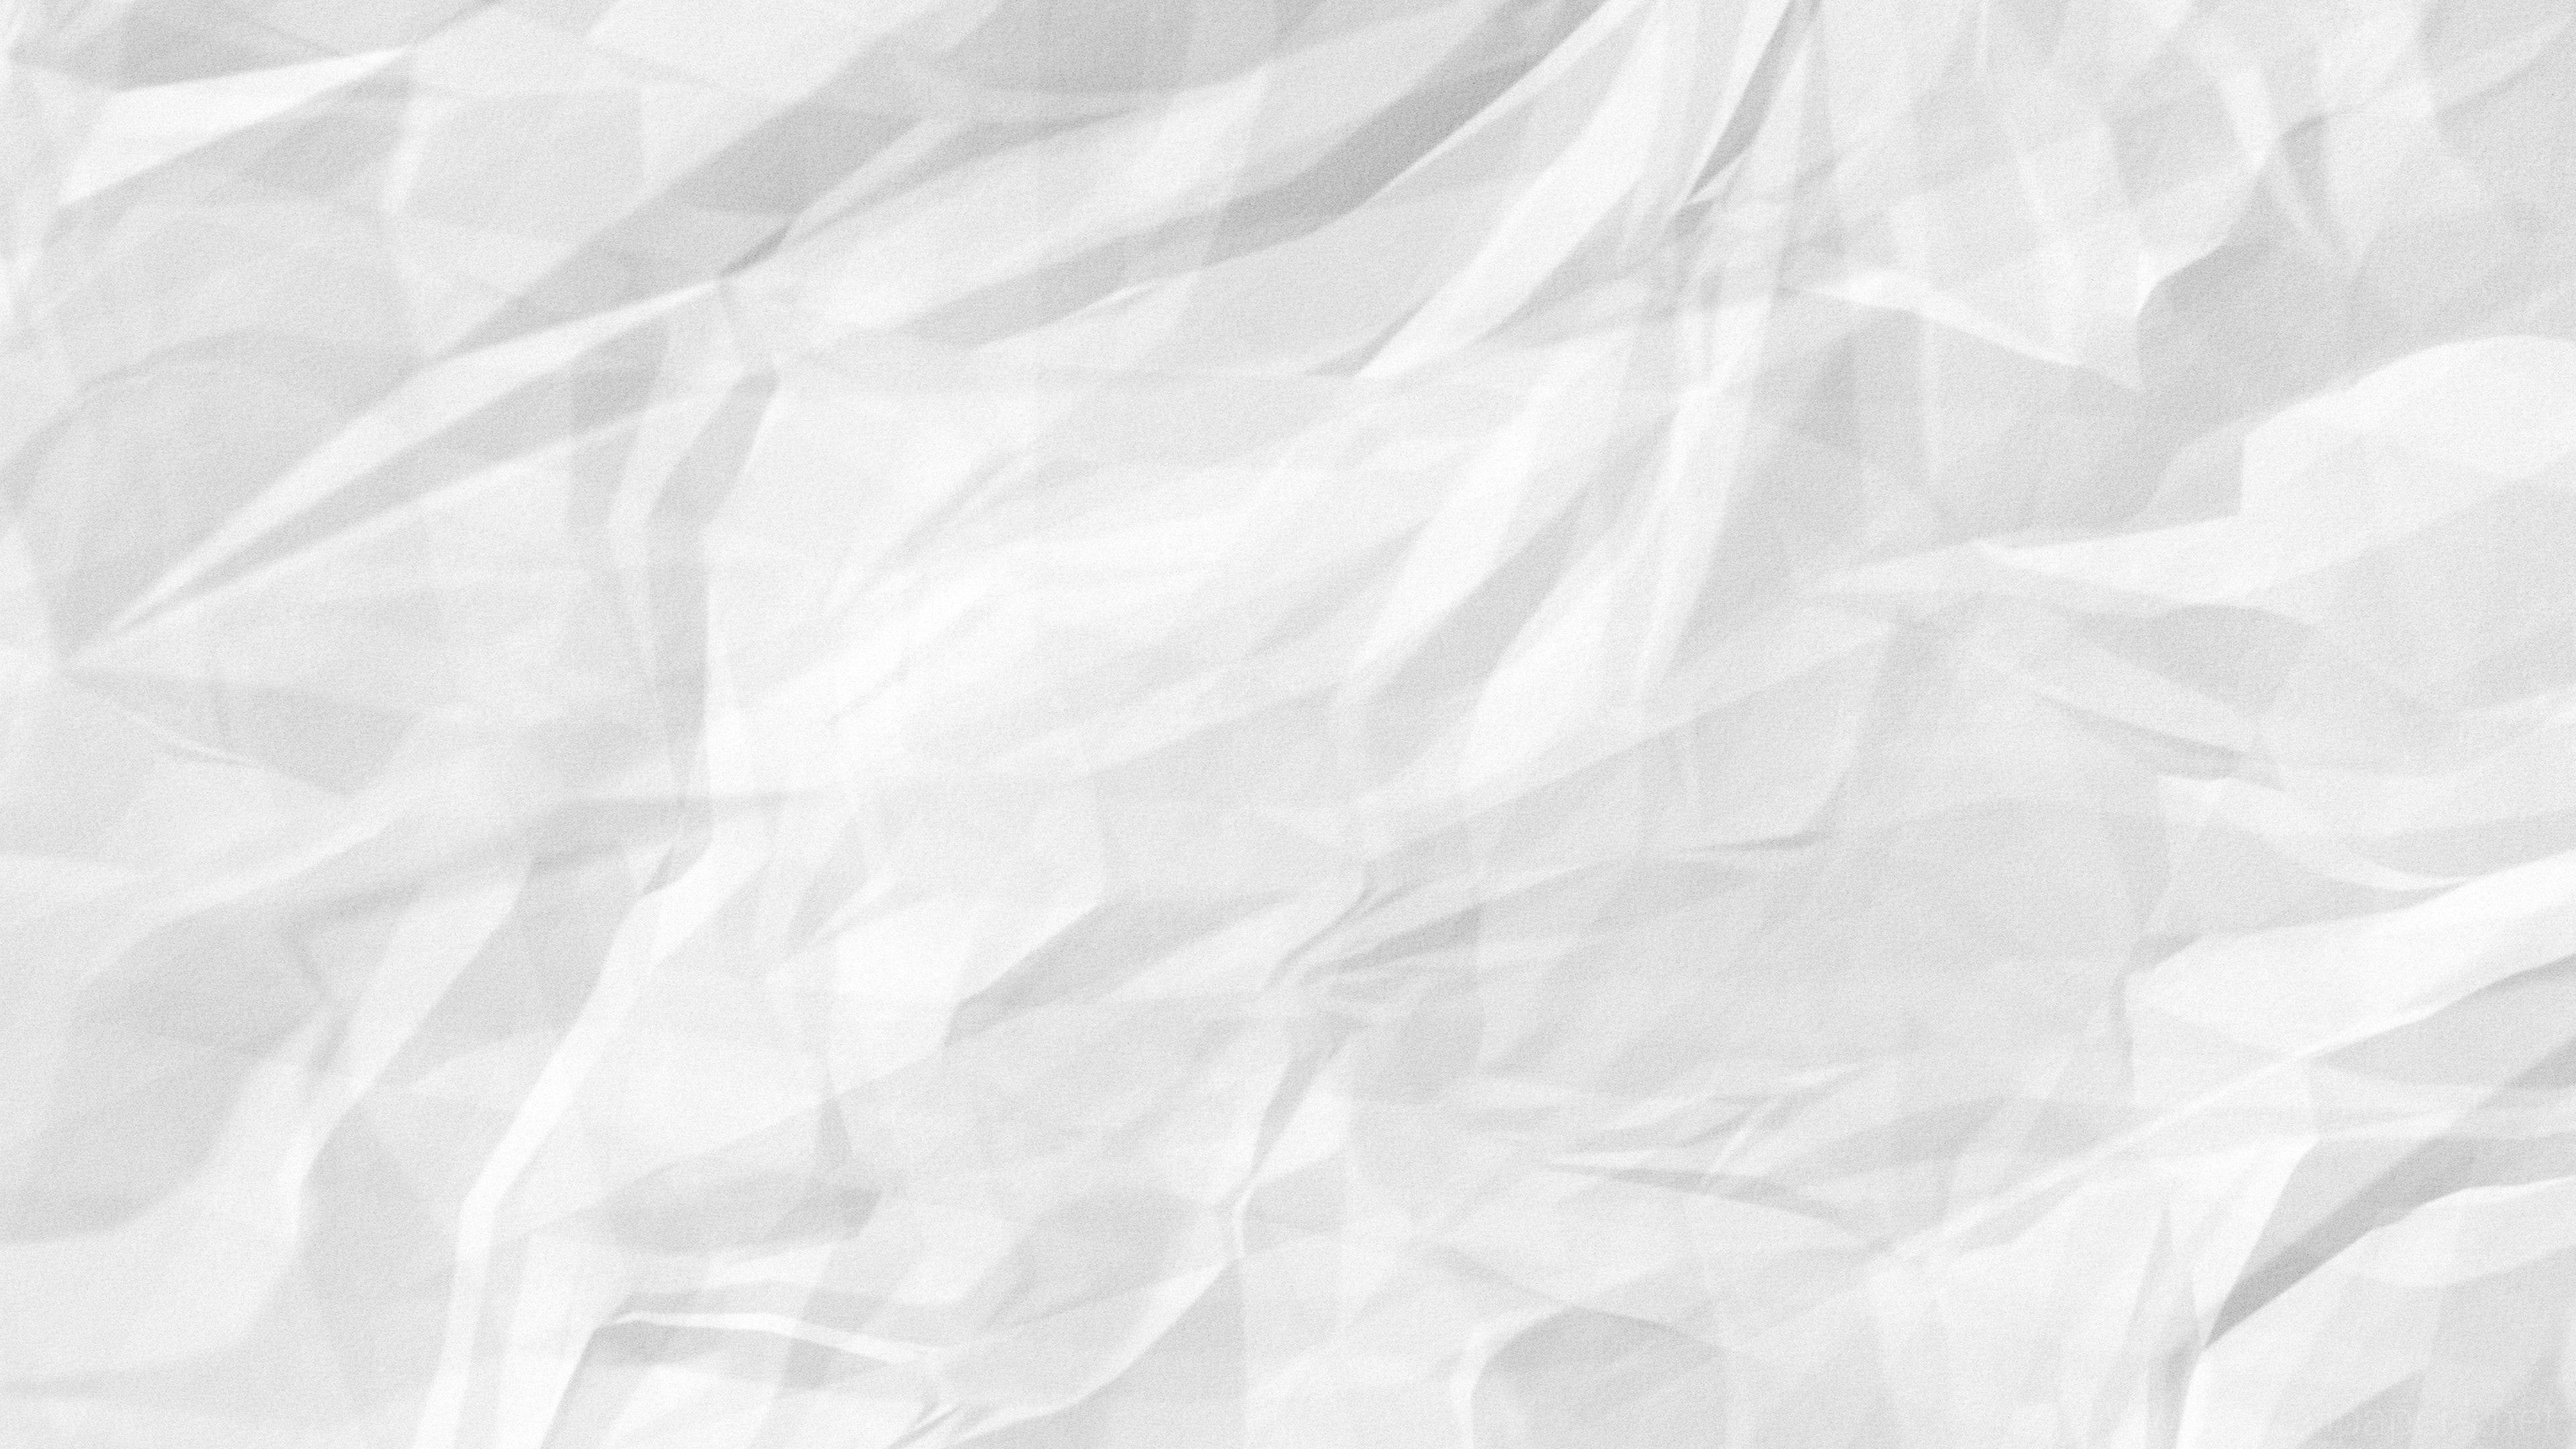 Wrinkled Paper Images | Free Photos, PNG Stickers, Wallpapers & Backgrounds  - rawpixel